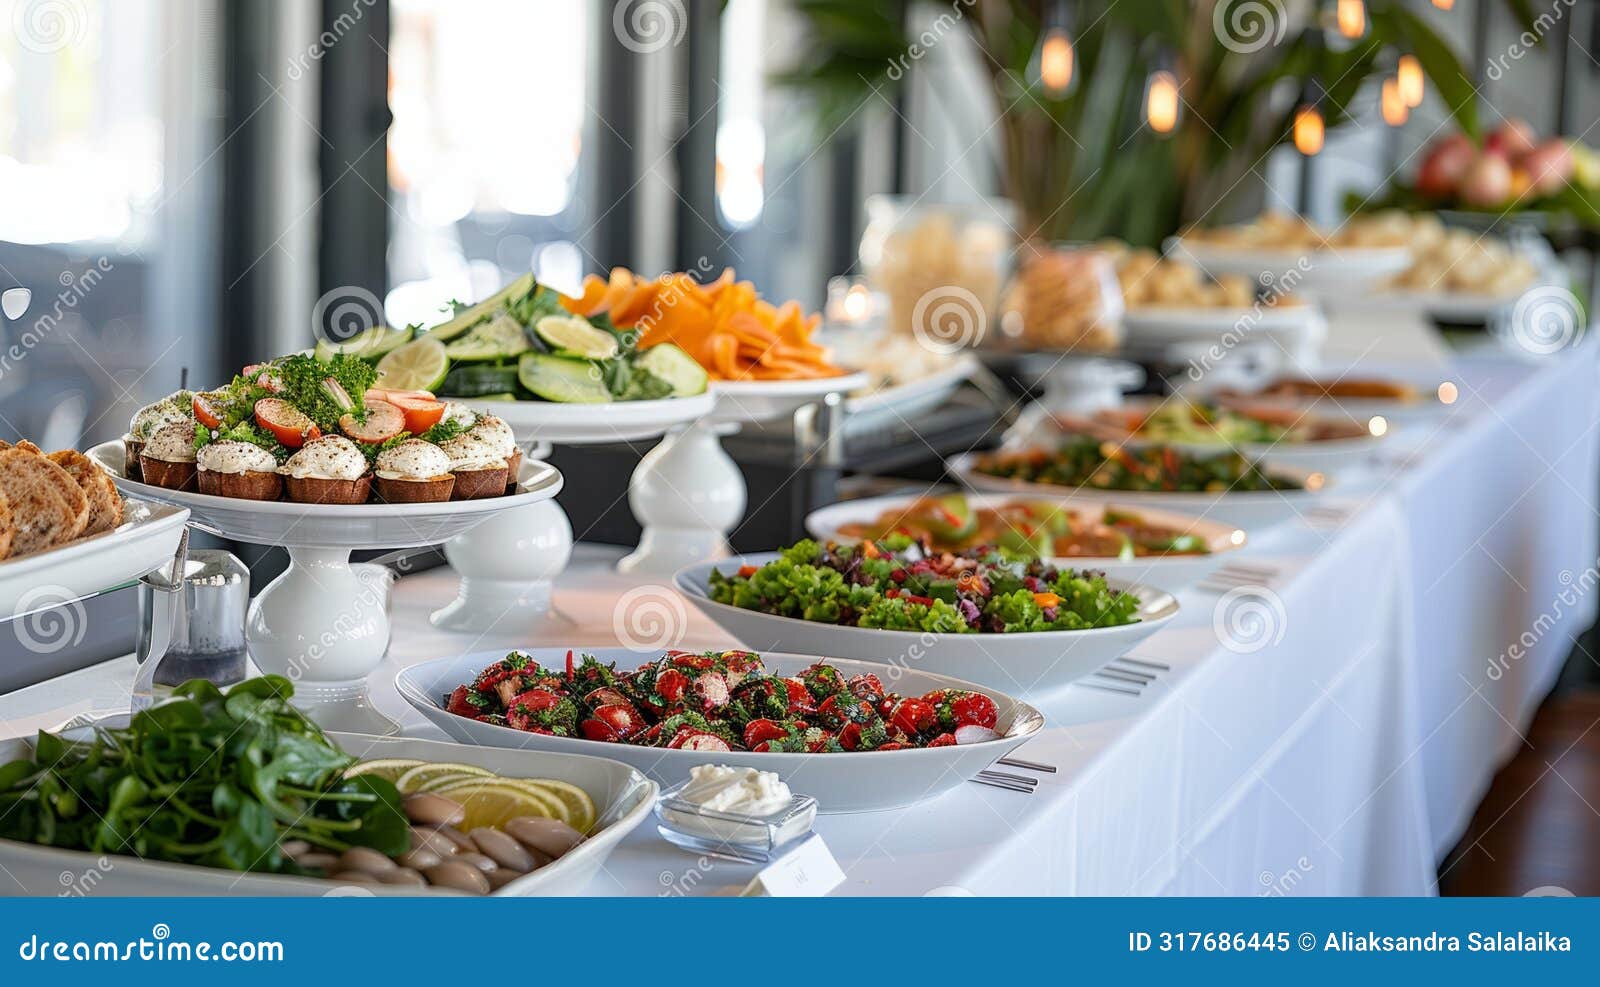 event catering buffet, long tables draped in white tablecloths showcase a selection of dishes in an elegant buffet setup